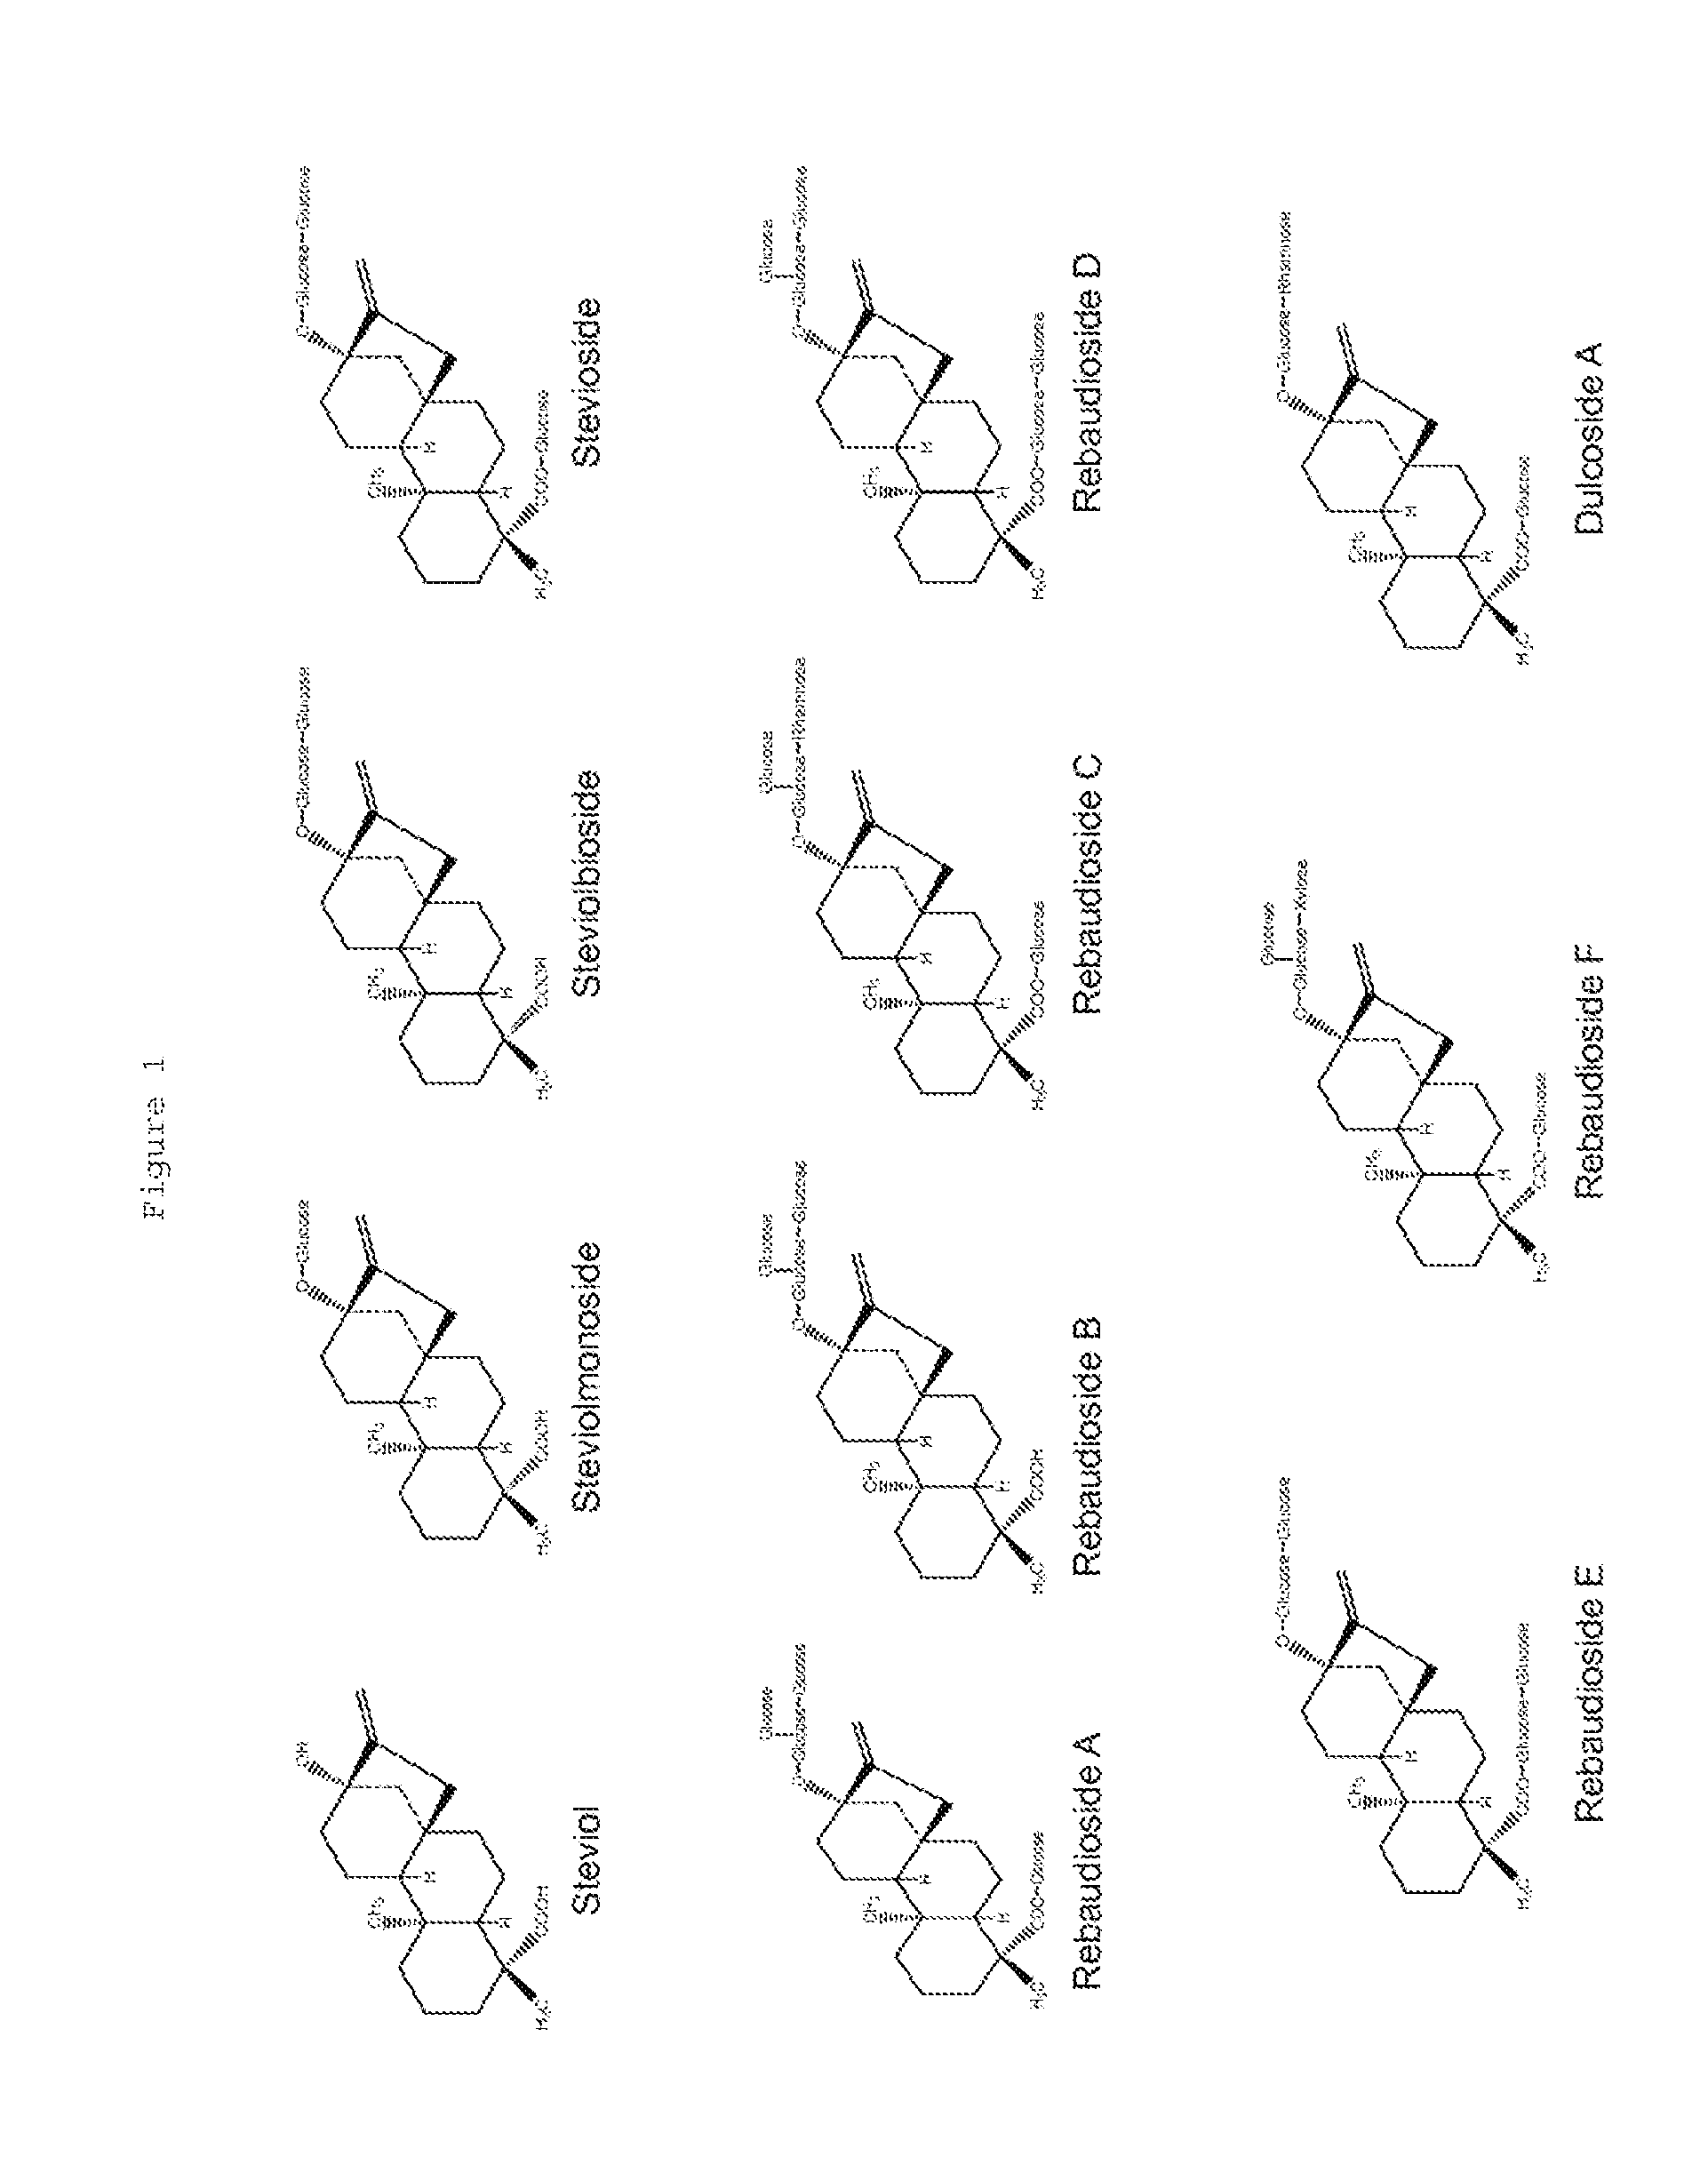 Recombinant Production of Steviol Glycosides